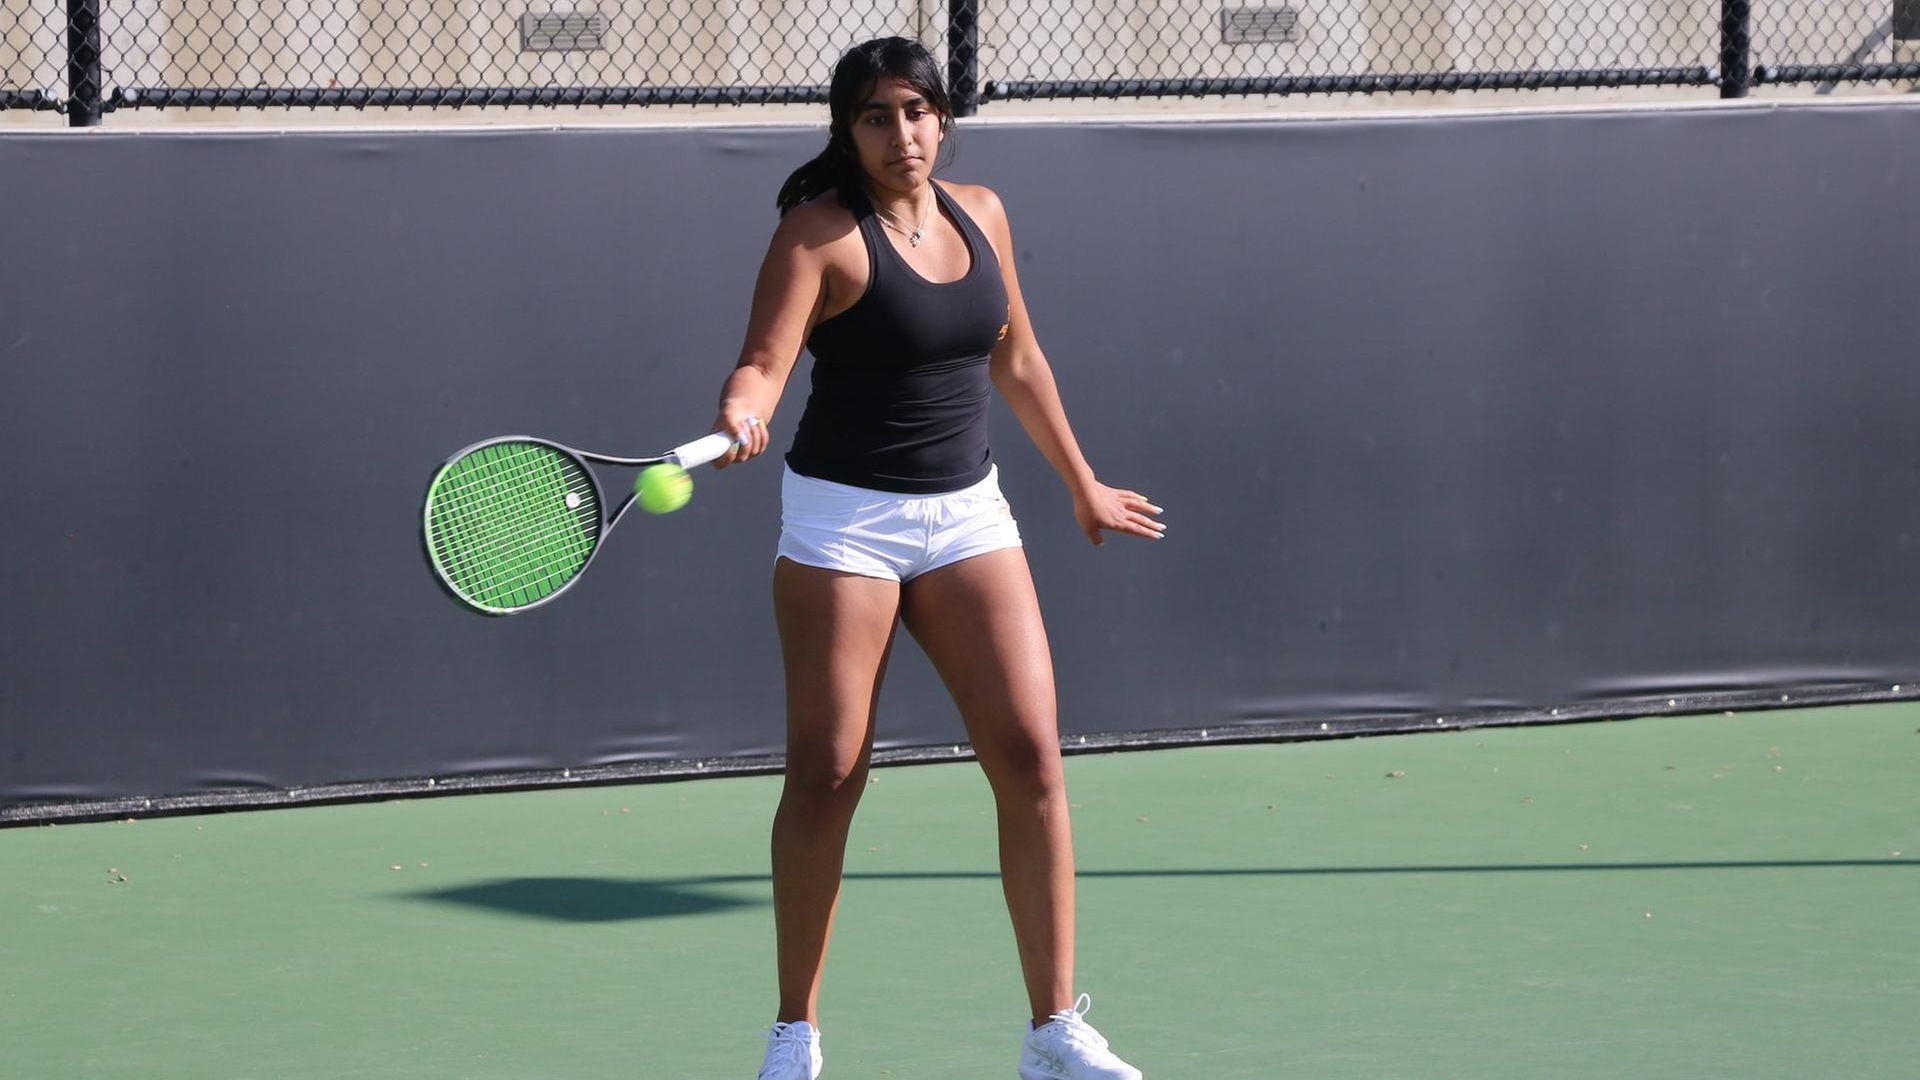 Arushi Malik won in singles and doubles, including the clincher at 6 singles